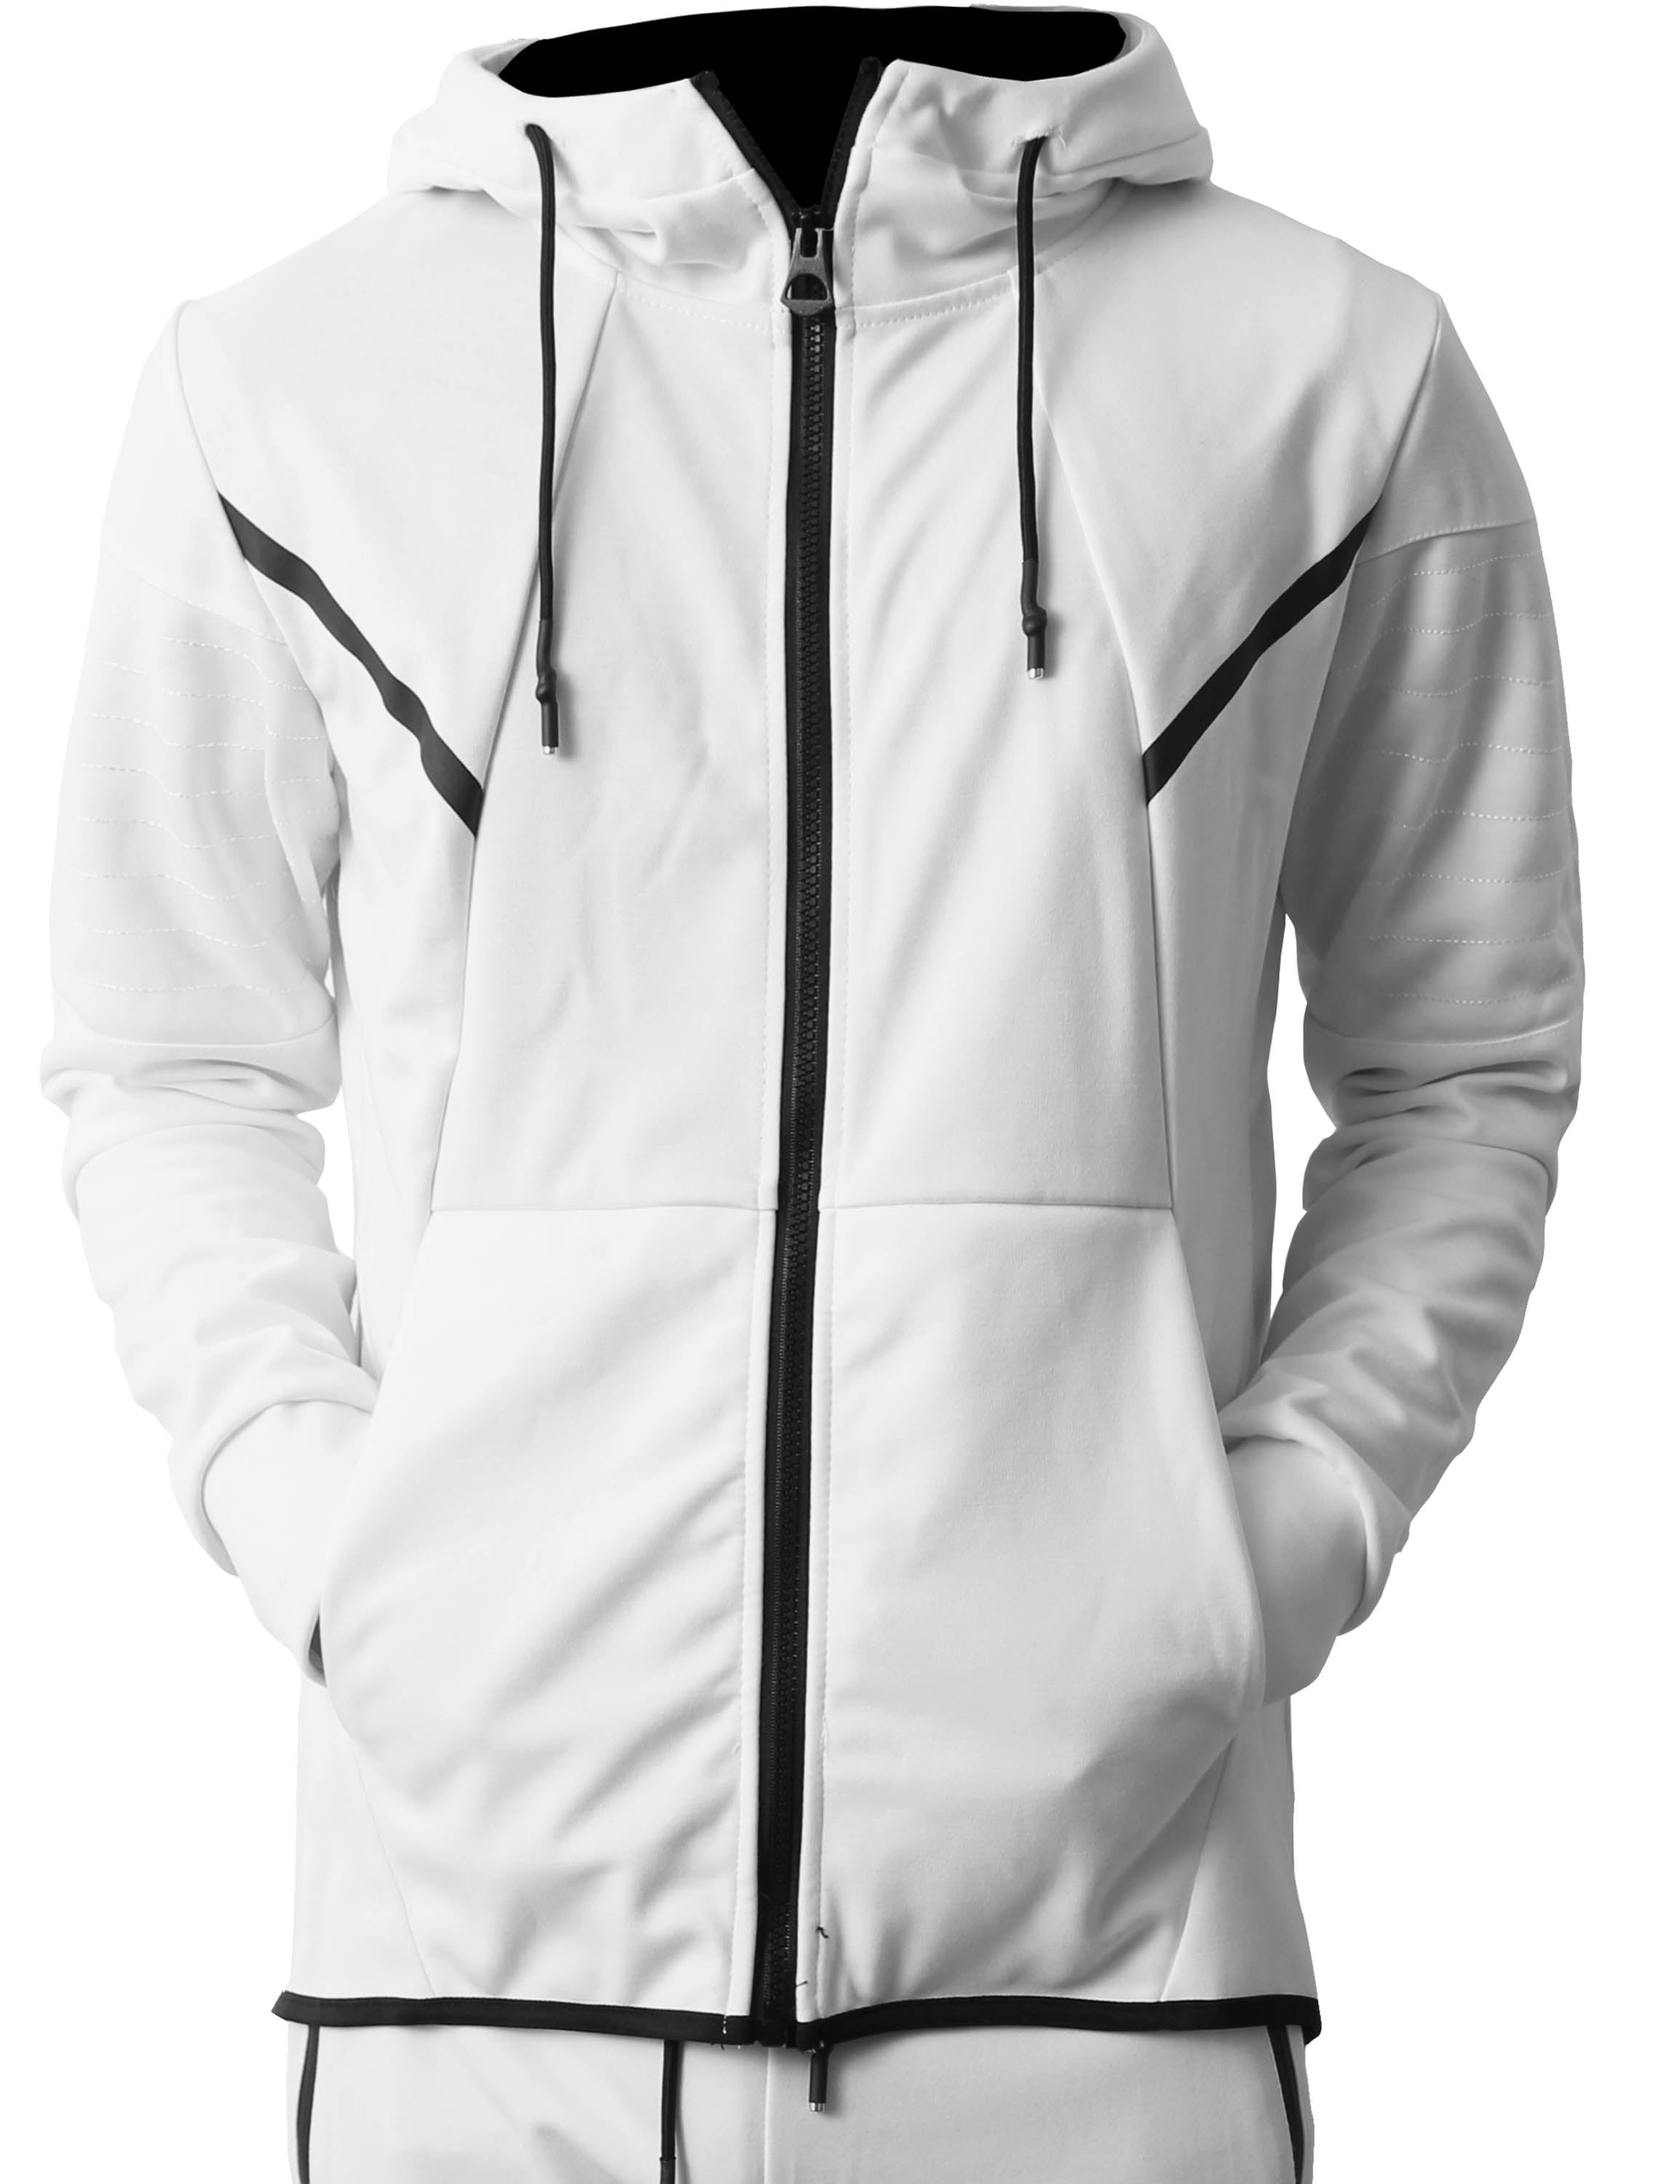 beroy Hoodies for Men Full Zip Basic Athletic Training Running Jacket Gym Workout Hooded Sweatshirt with 2 Zipper Pockets